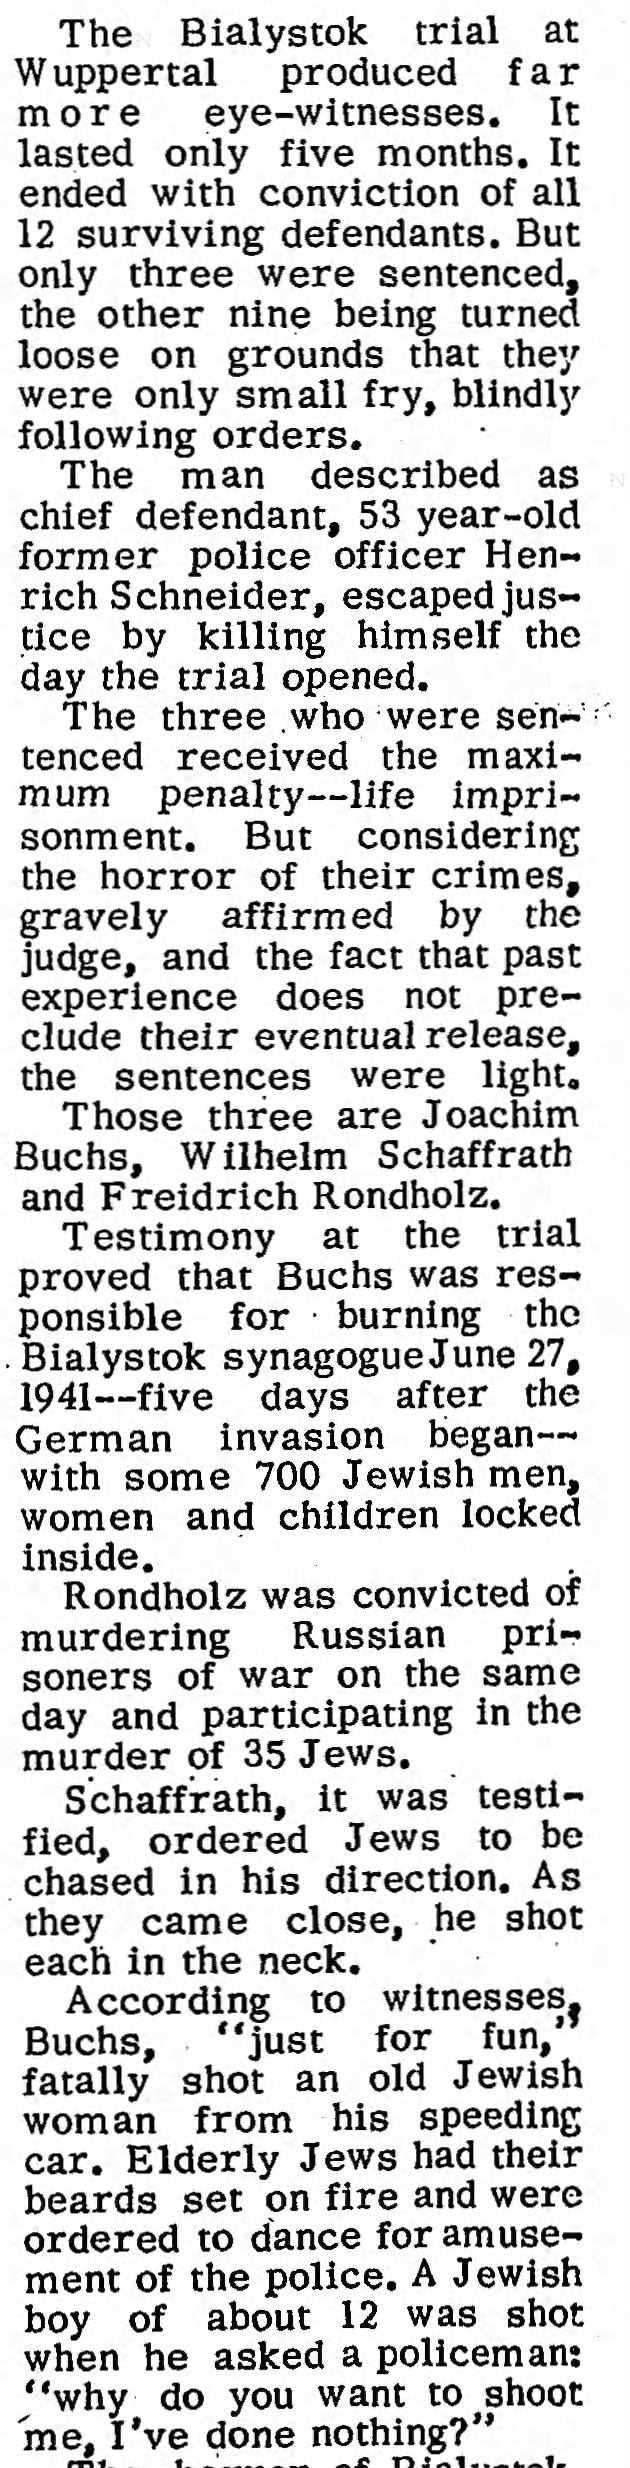 Excerpt from article with accounts of Nazi violence against Jews during Operation Barbarossa